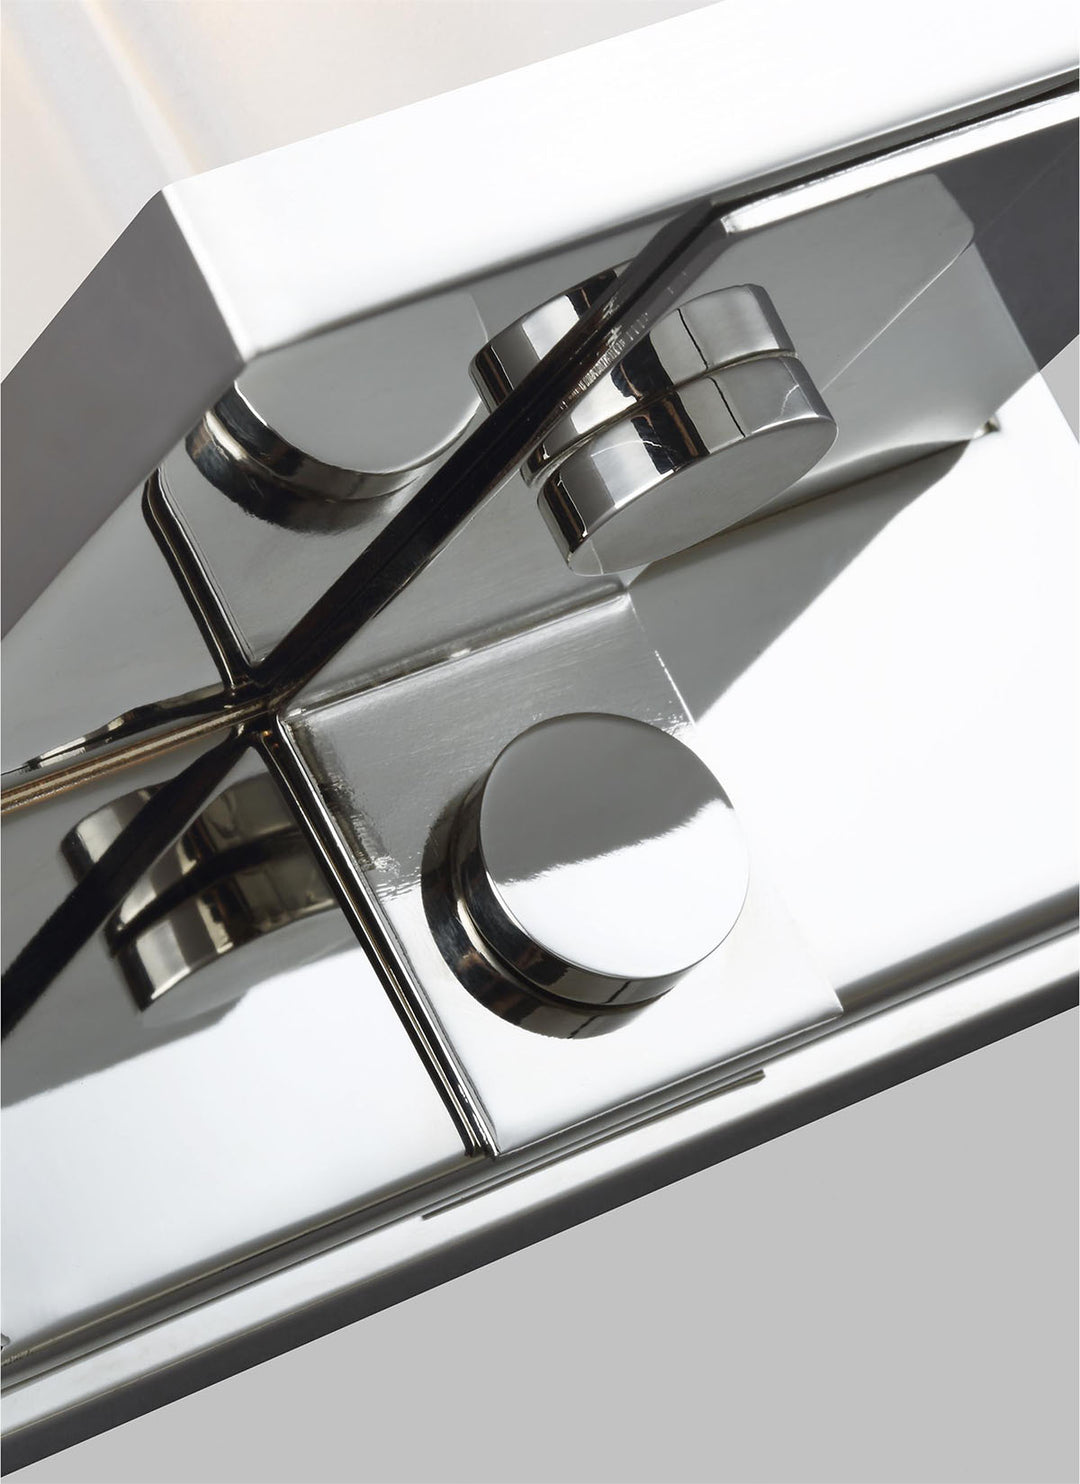 Polished nickel details on the minimal wall sconce with a rectangular light.